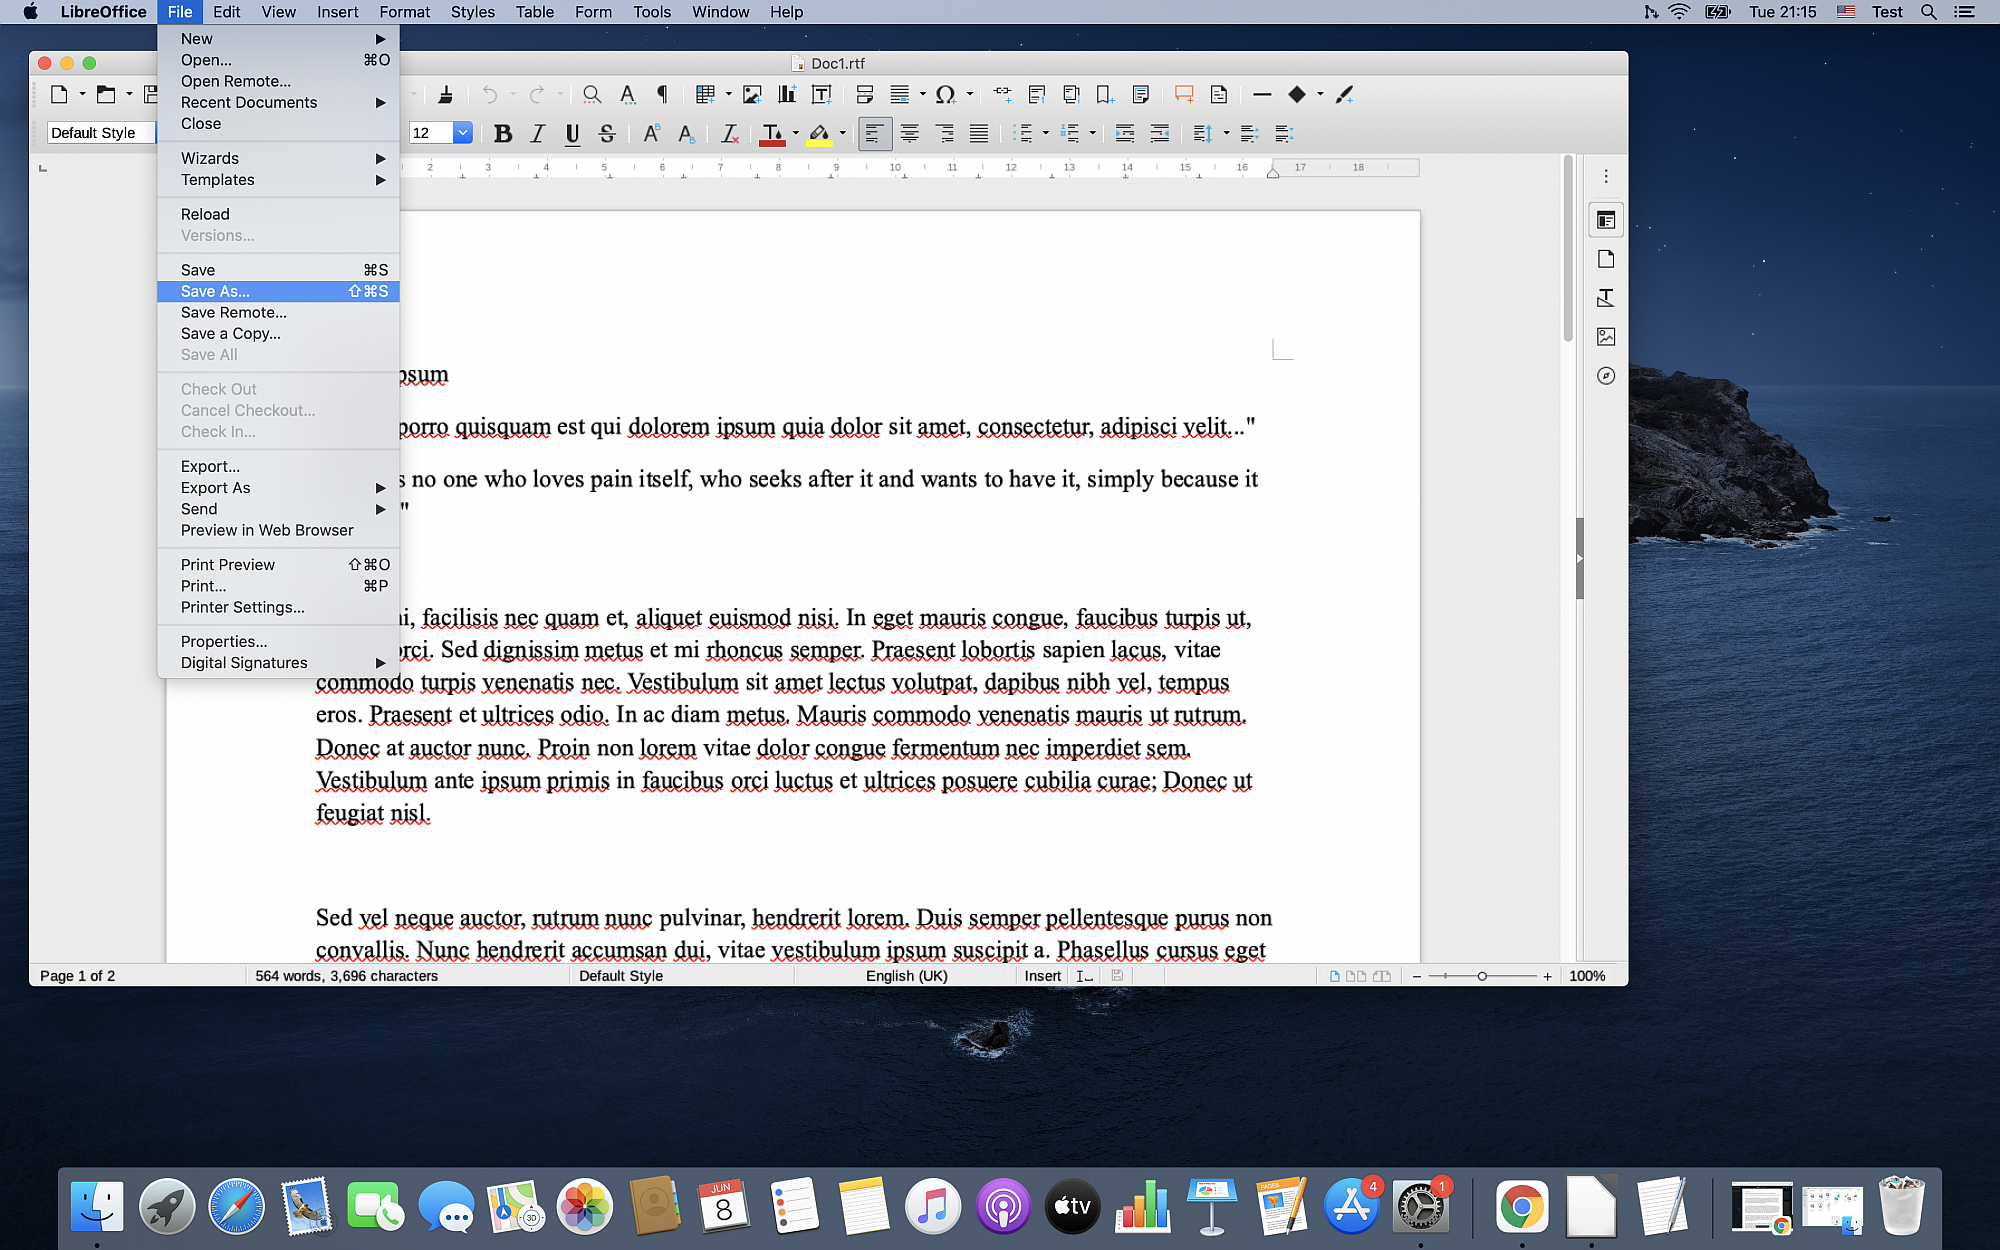 How to use LibreOffice Writer as RTF to DOCX converter on Mac?